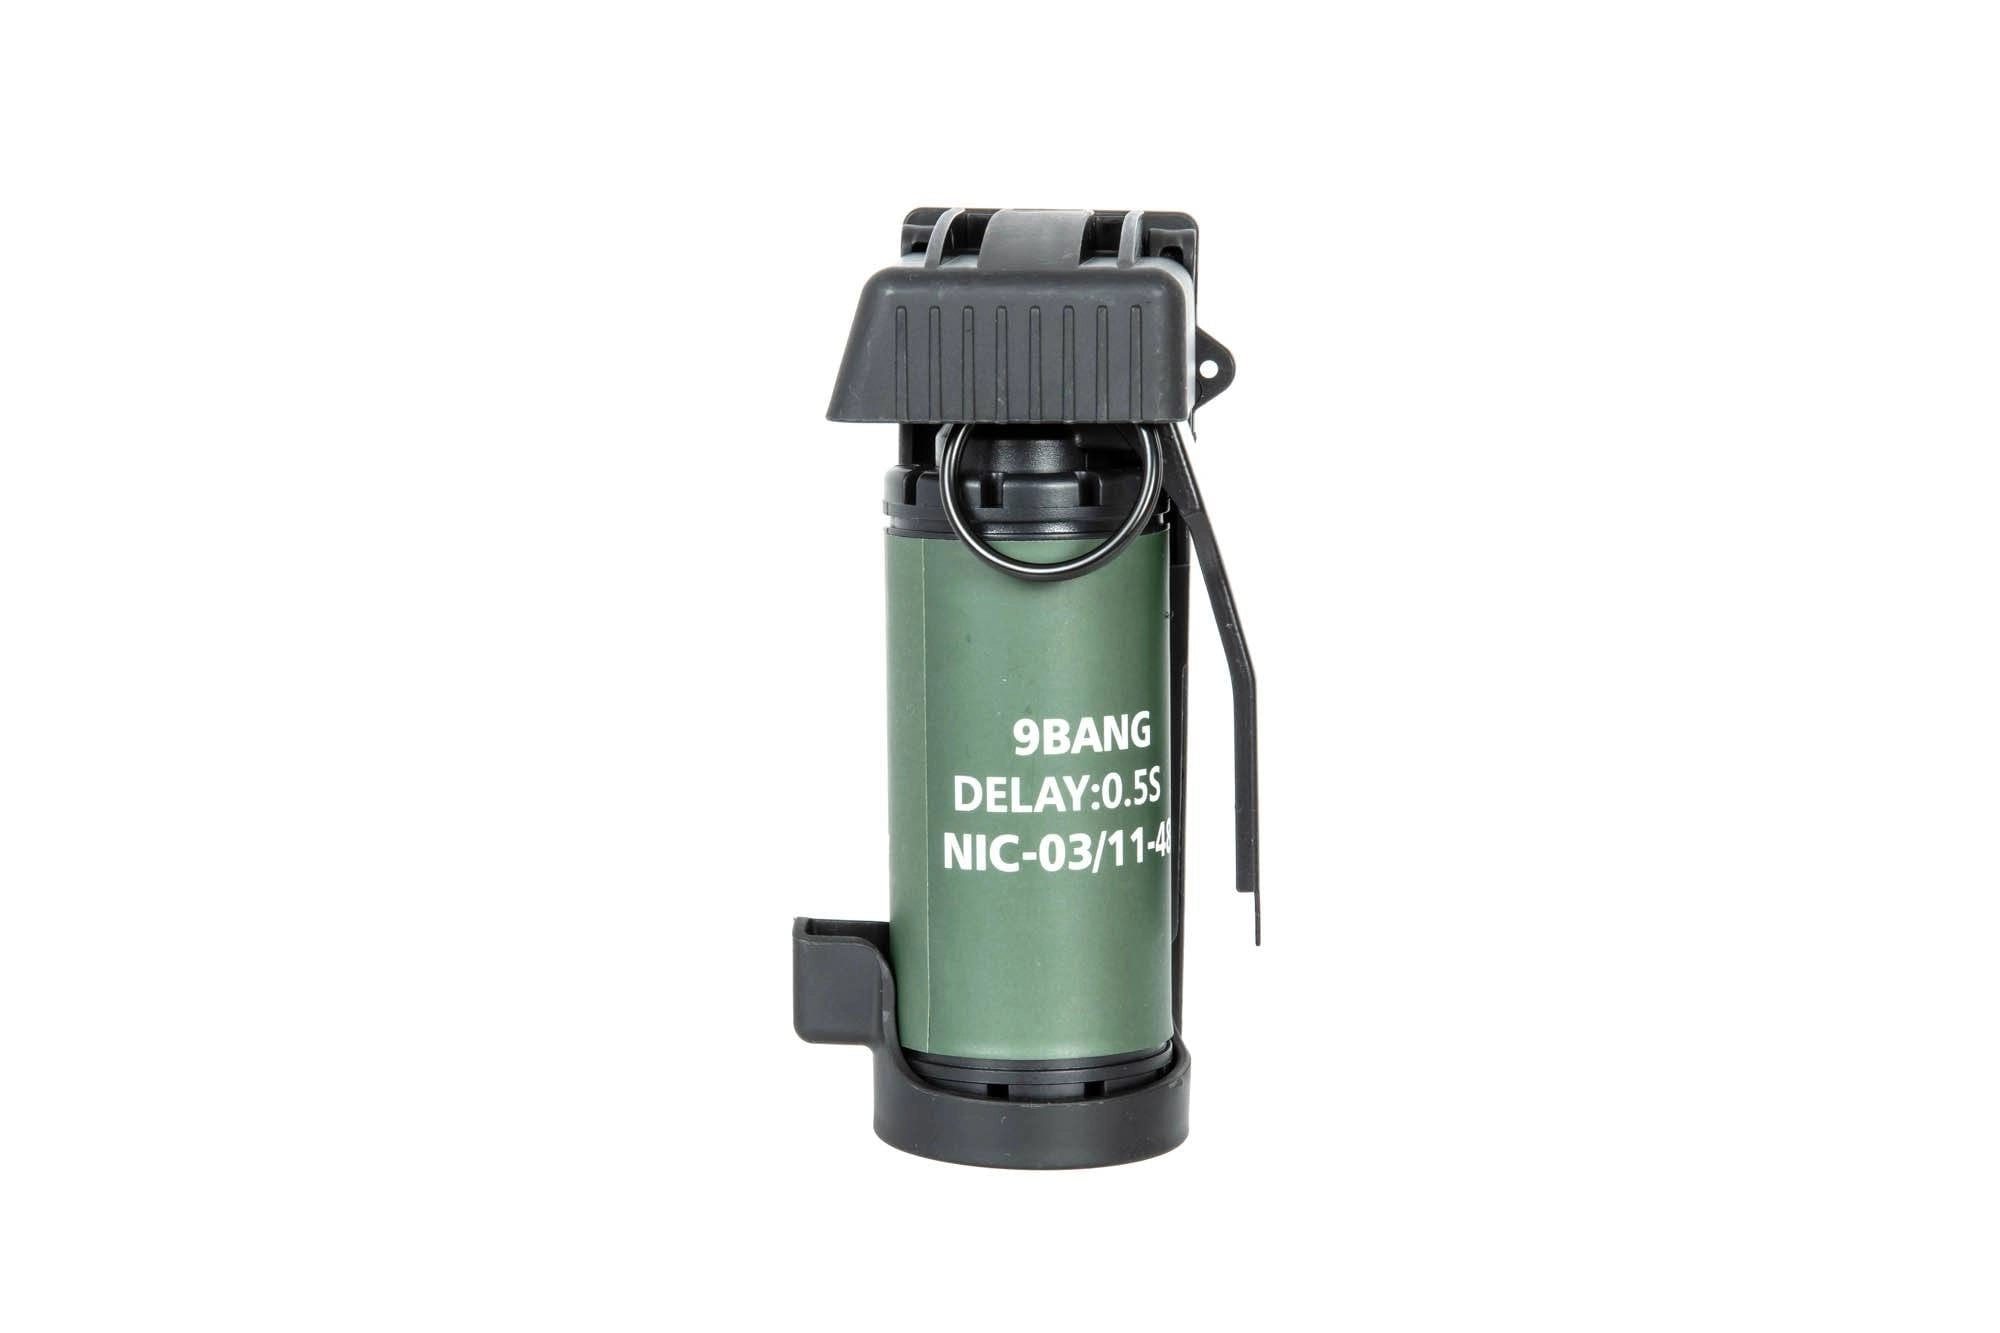 Dummy Smoke Grenade with pouch - black